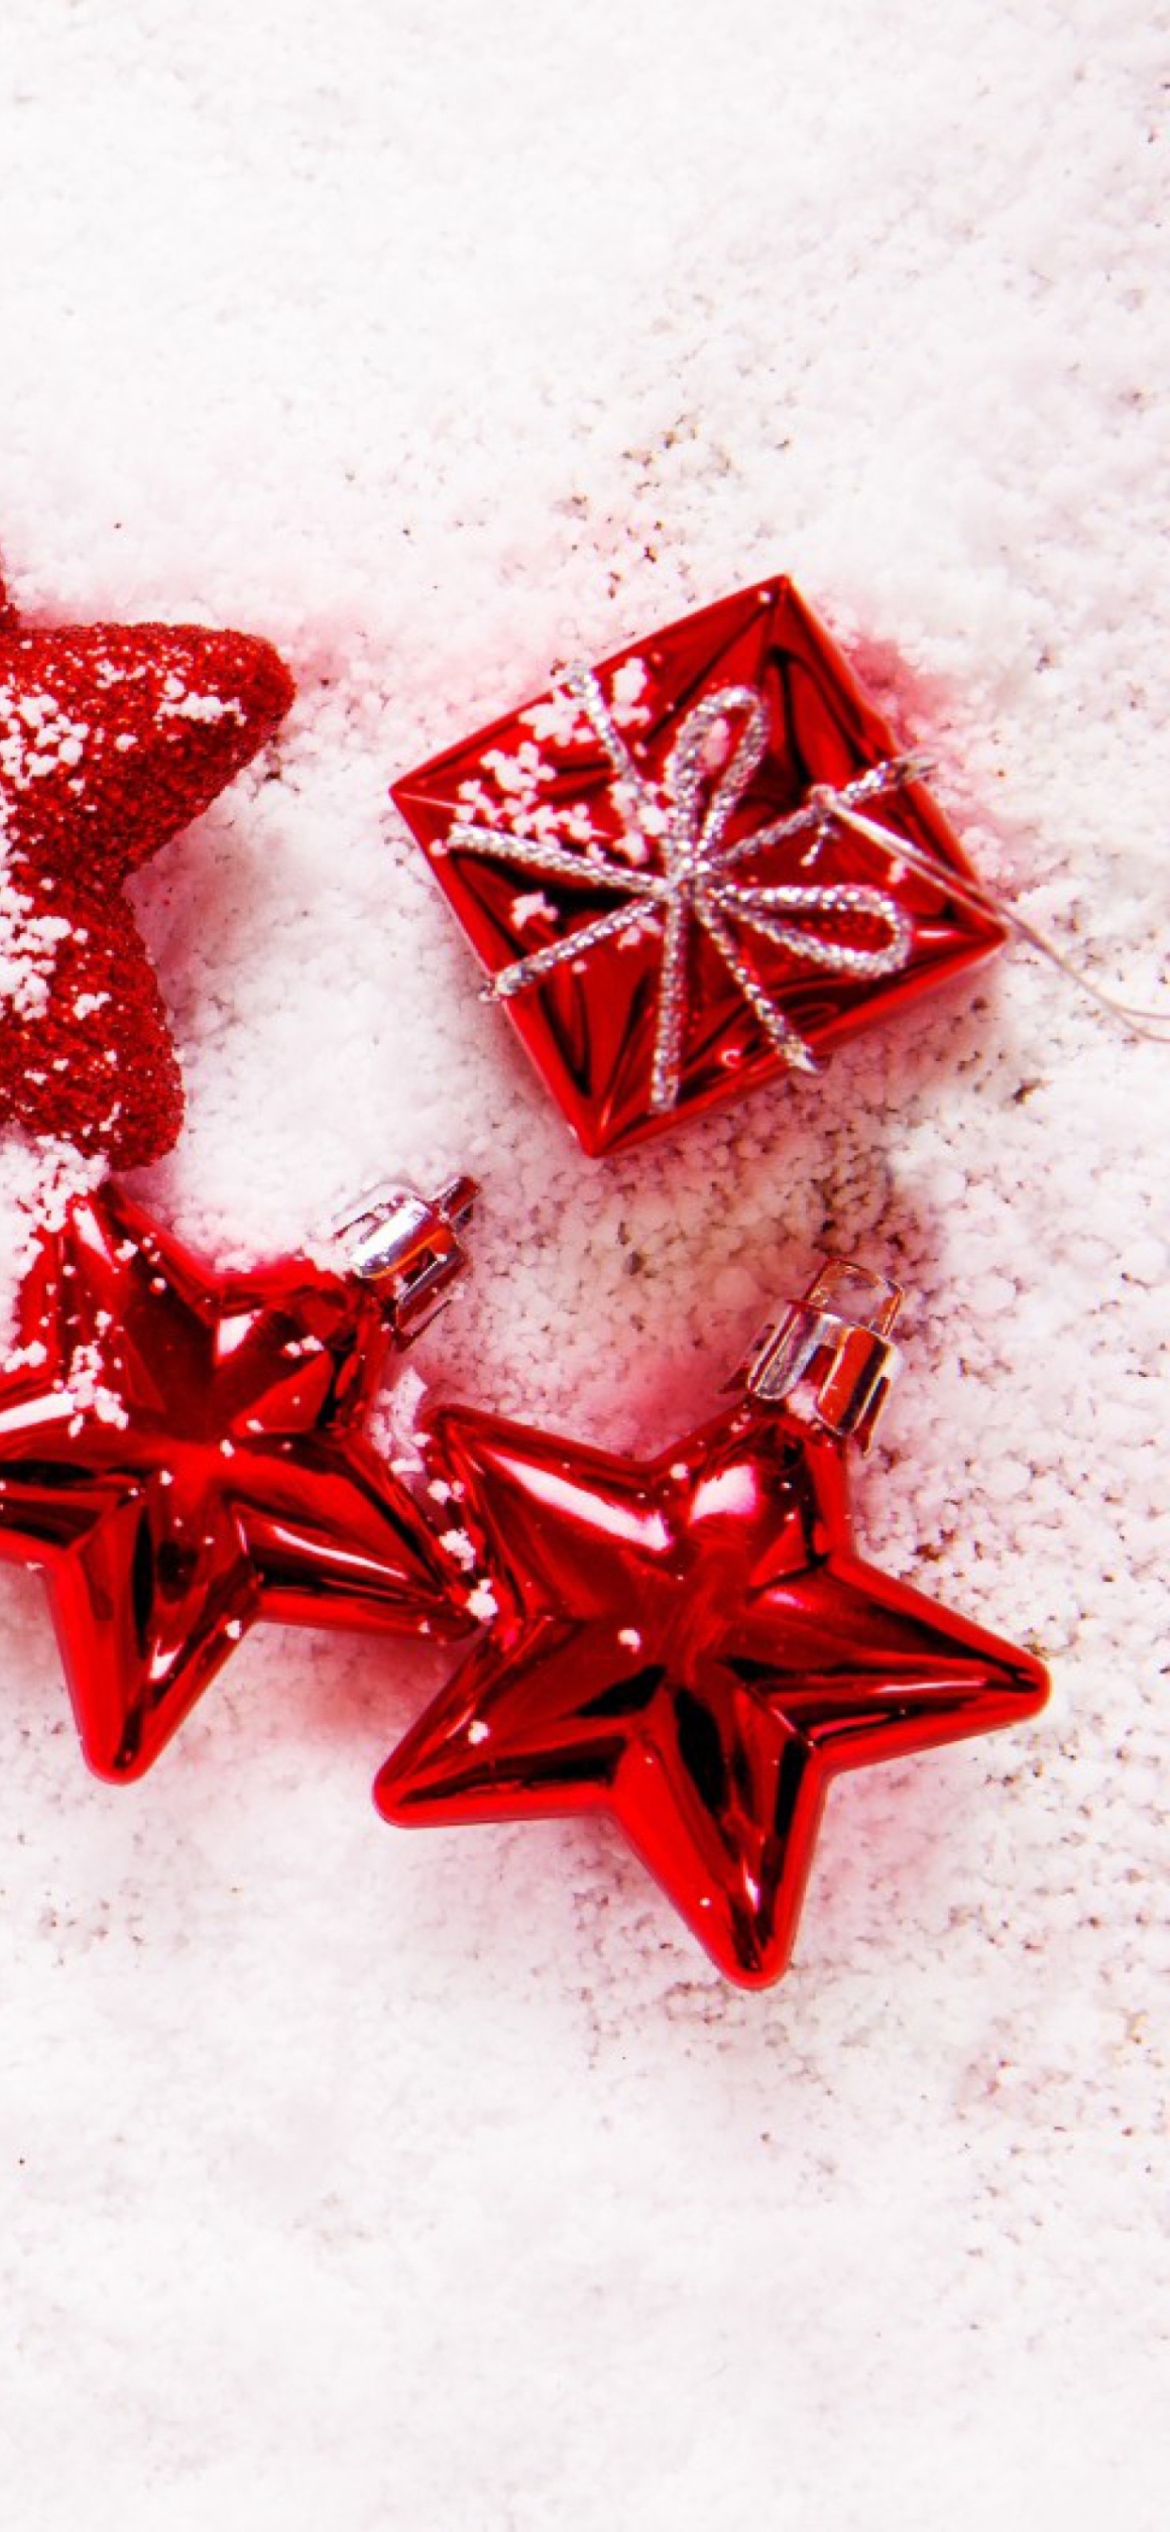 Red Decorations wallpaper 1170x2532